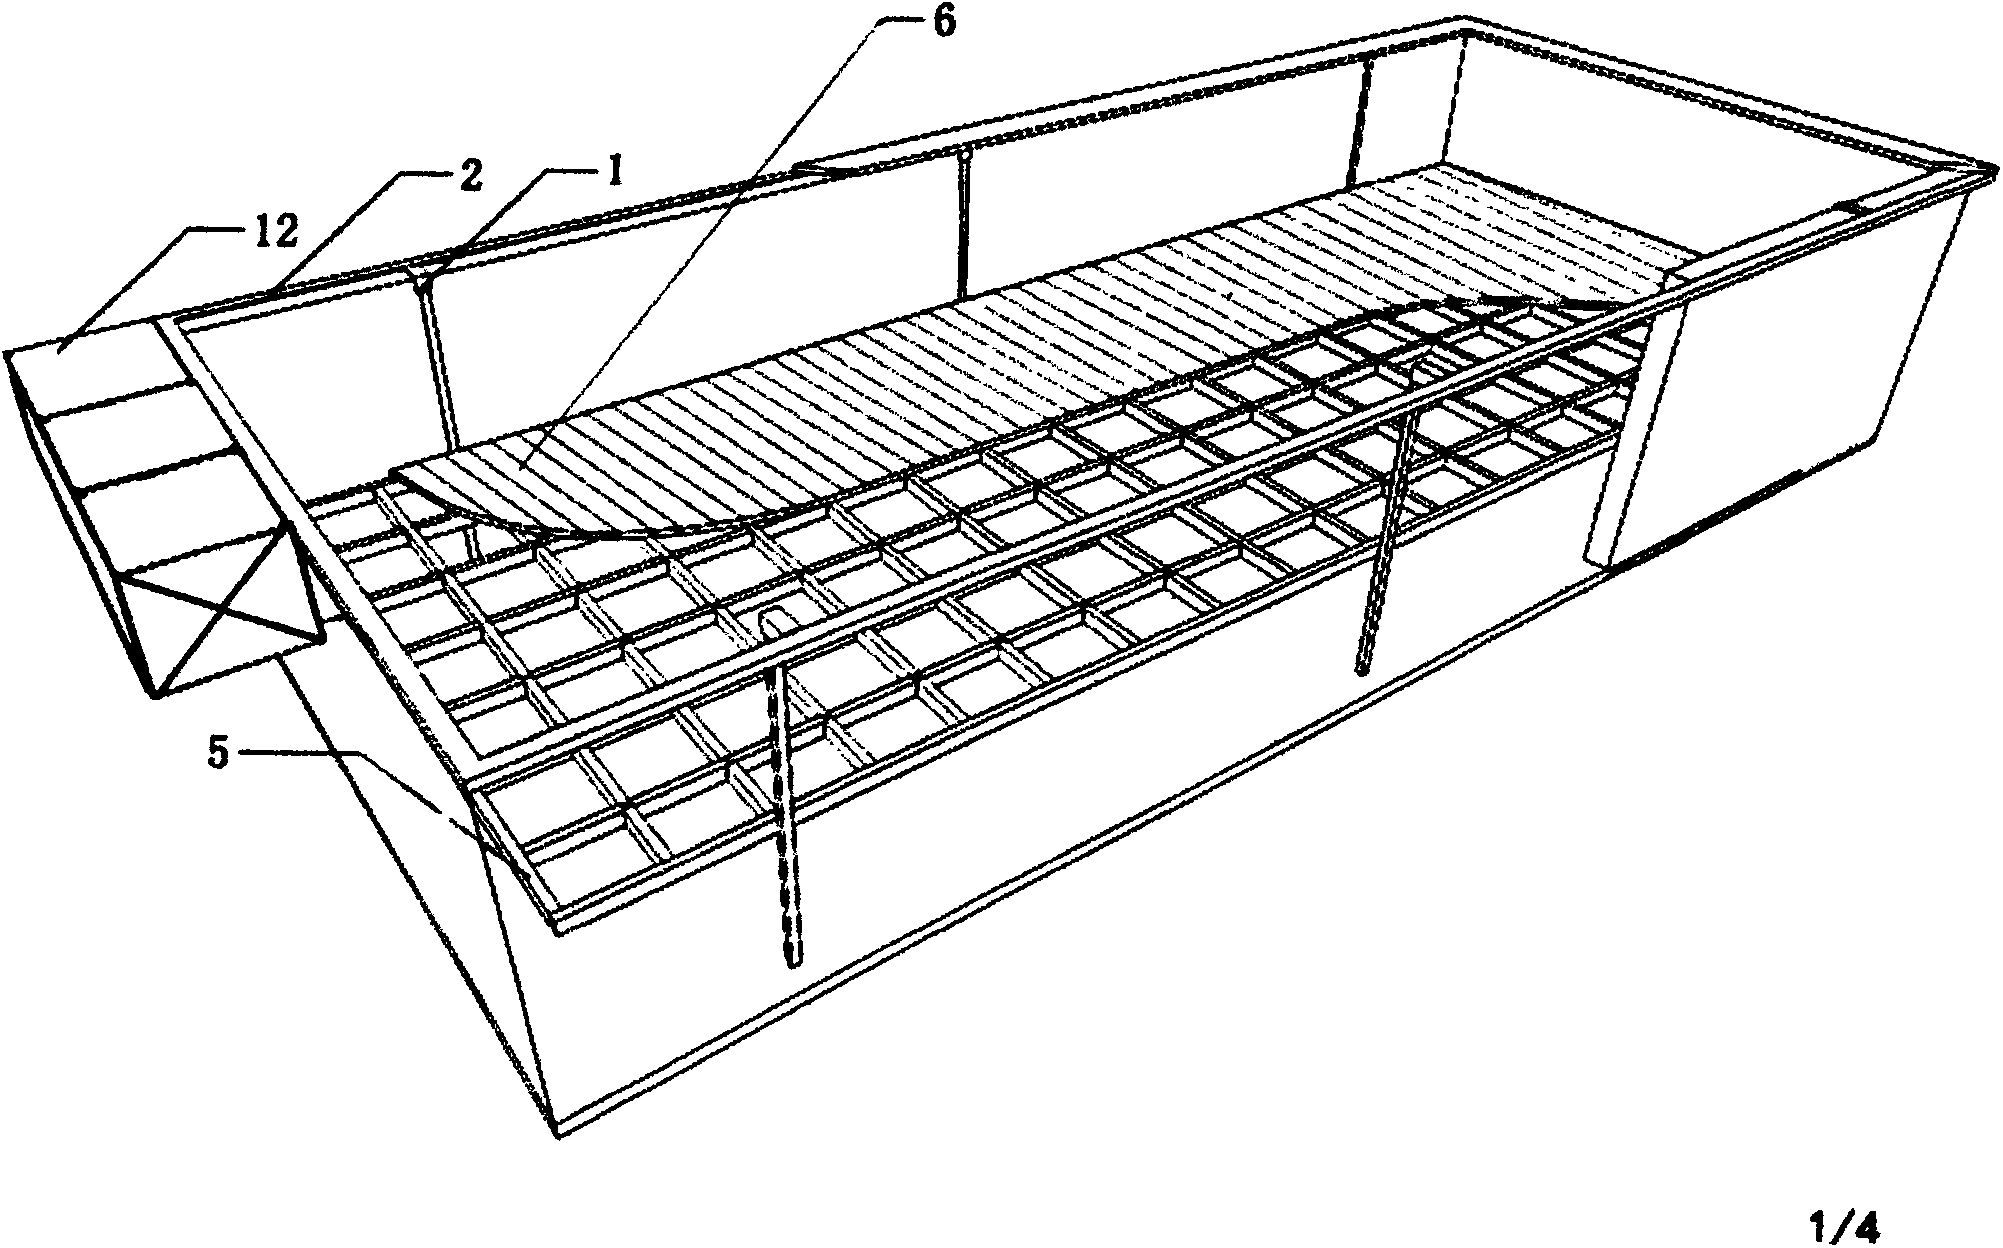 Technology of swimming pool with lift-type movable floor